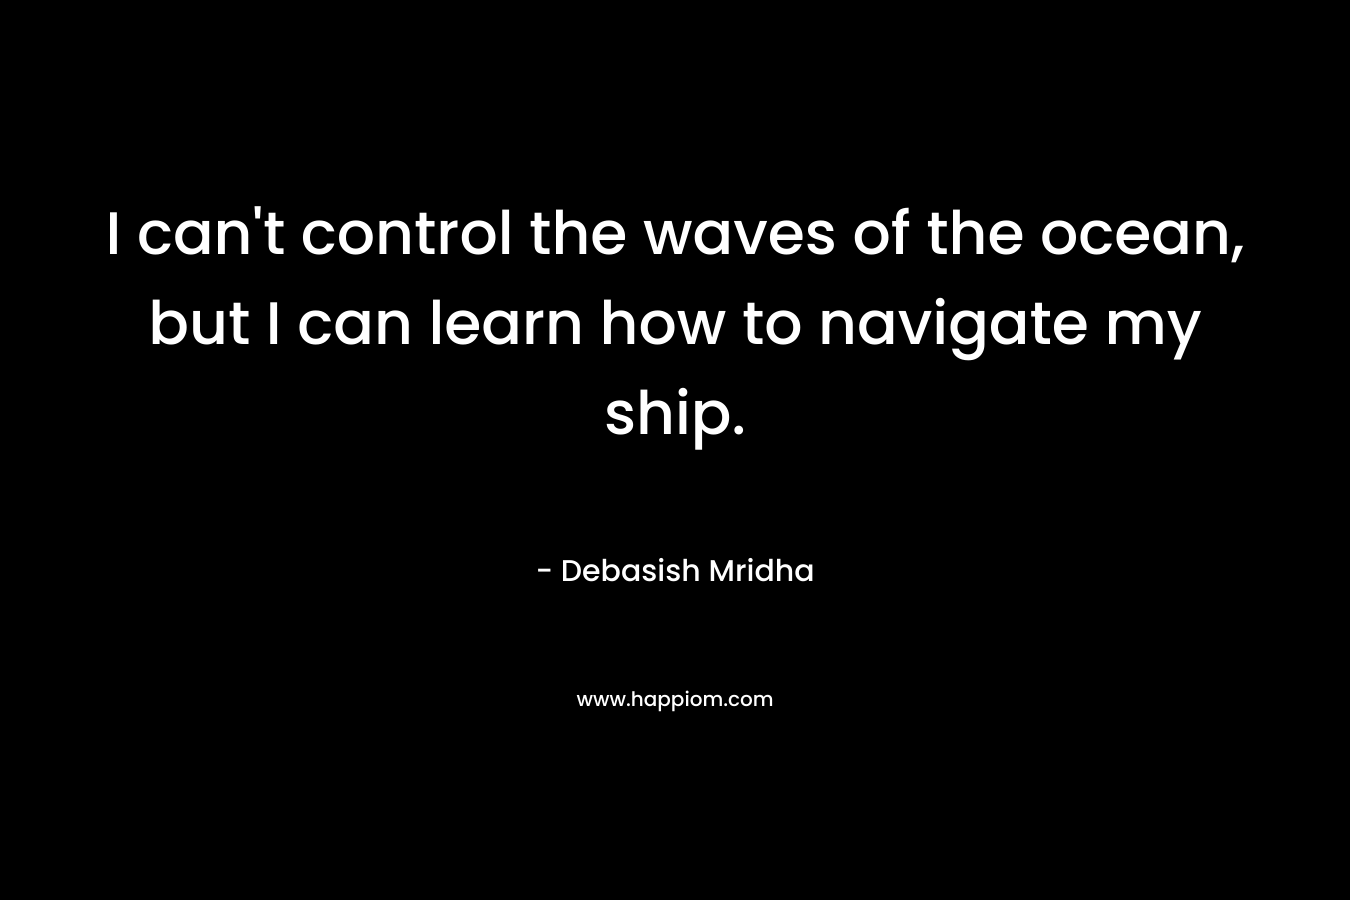 I can't control the waves of the ocean, but I can learn how to navigate my ship.